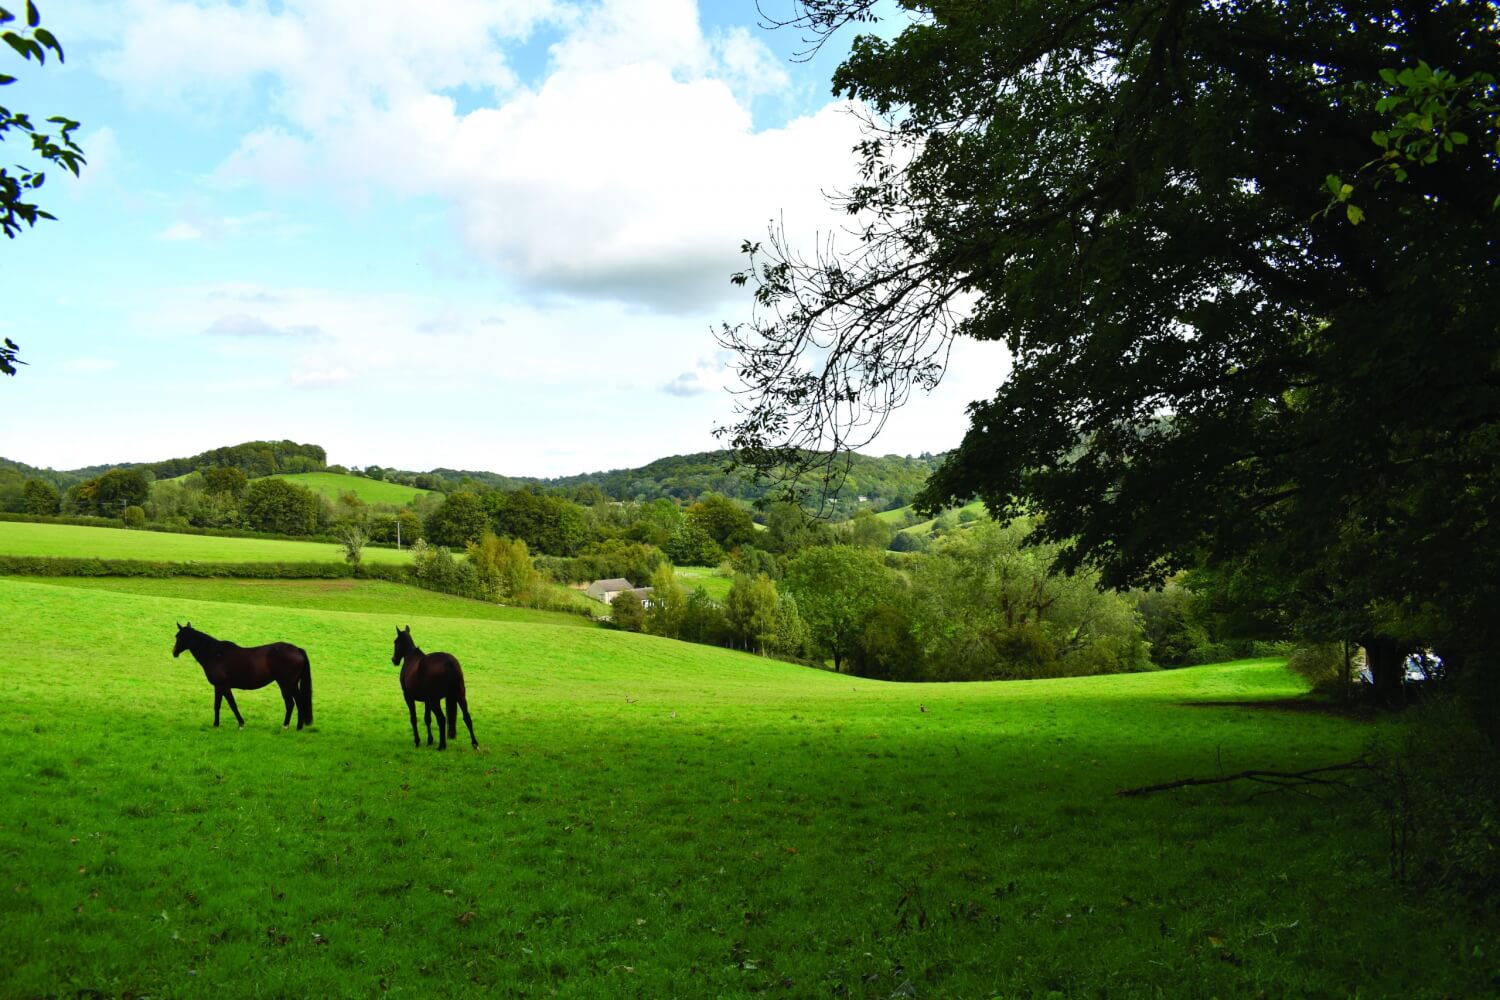 The Slad Valley is still a rural enclave that many will enjoy. Photo Alan Payling